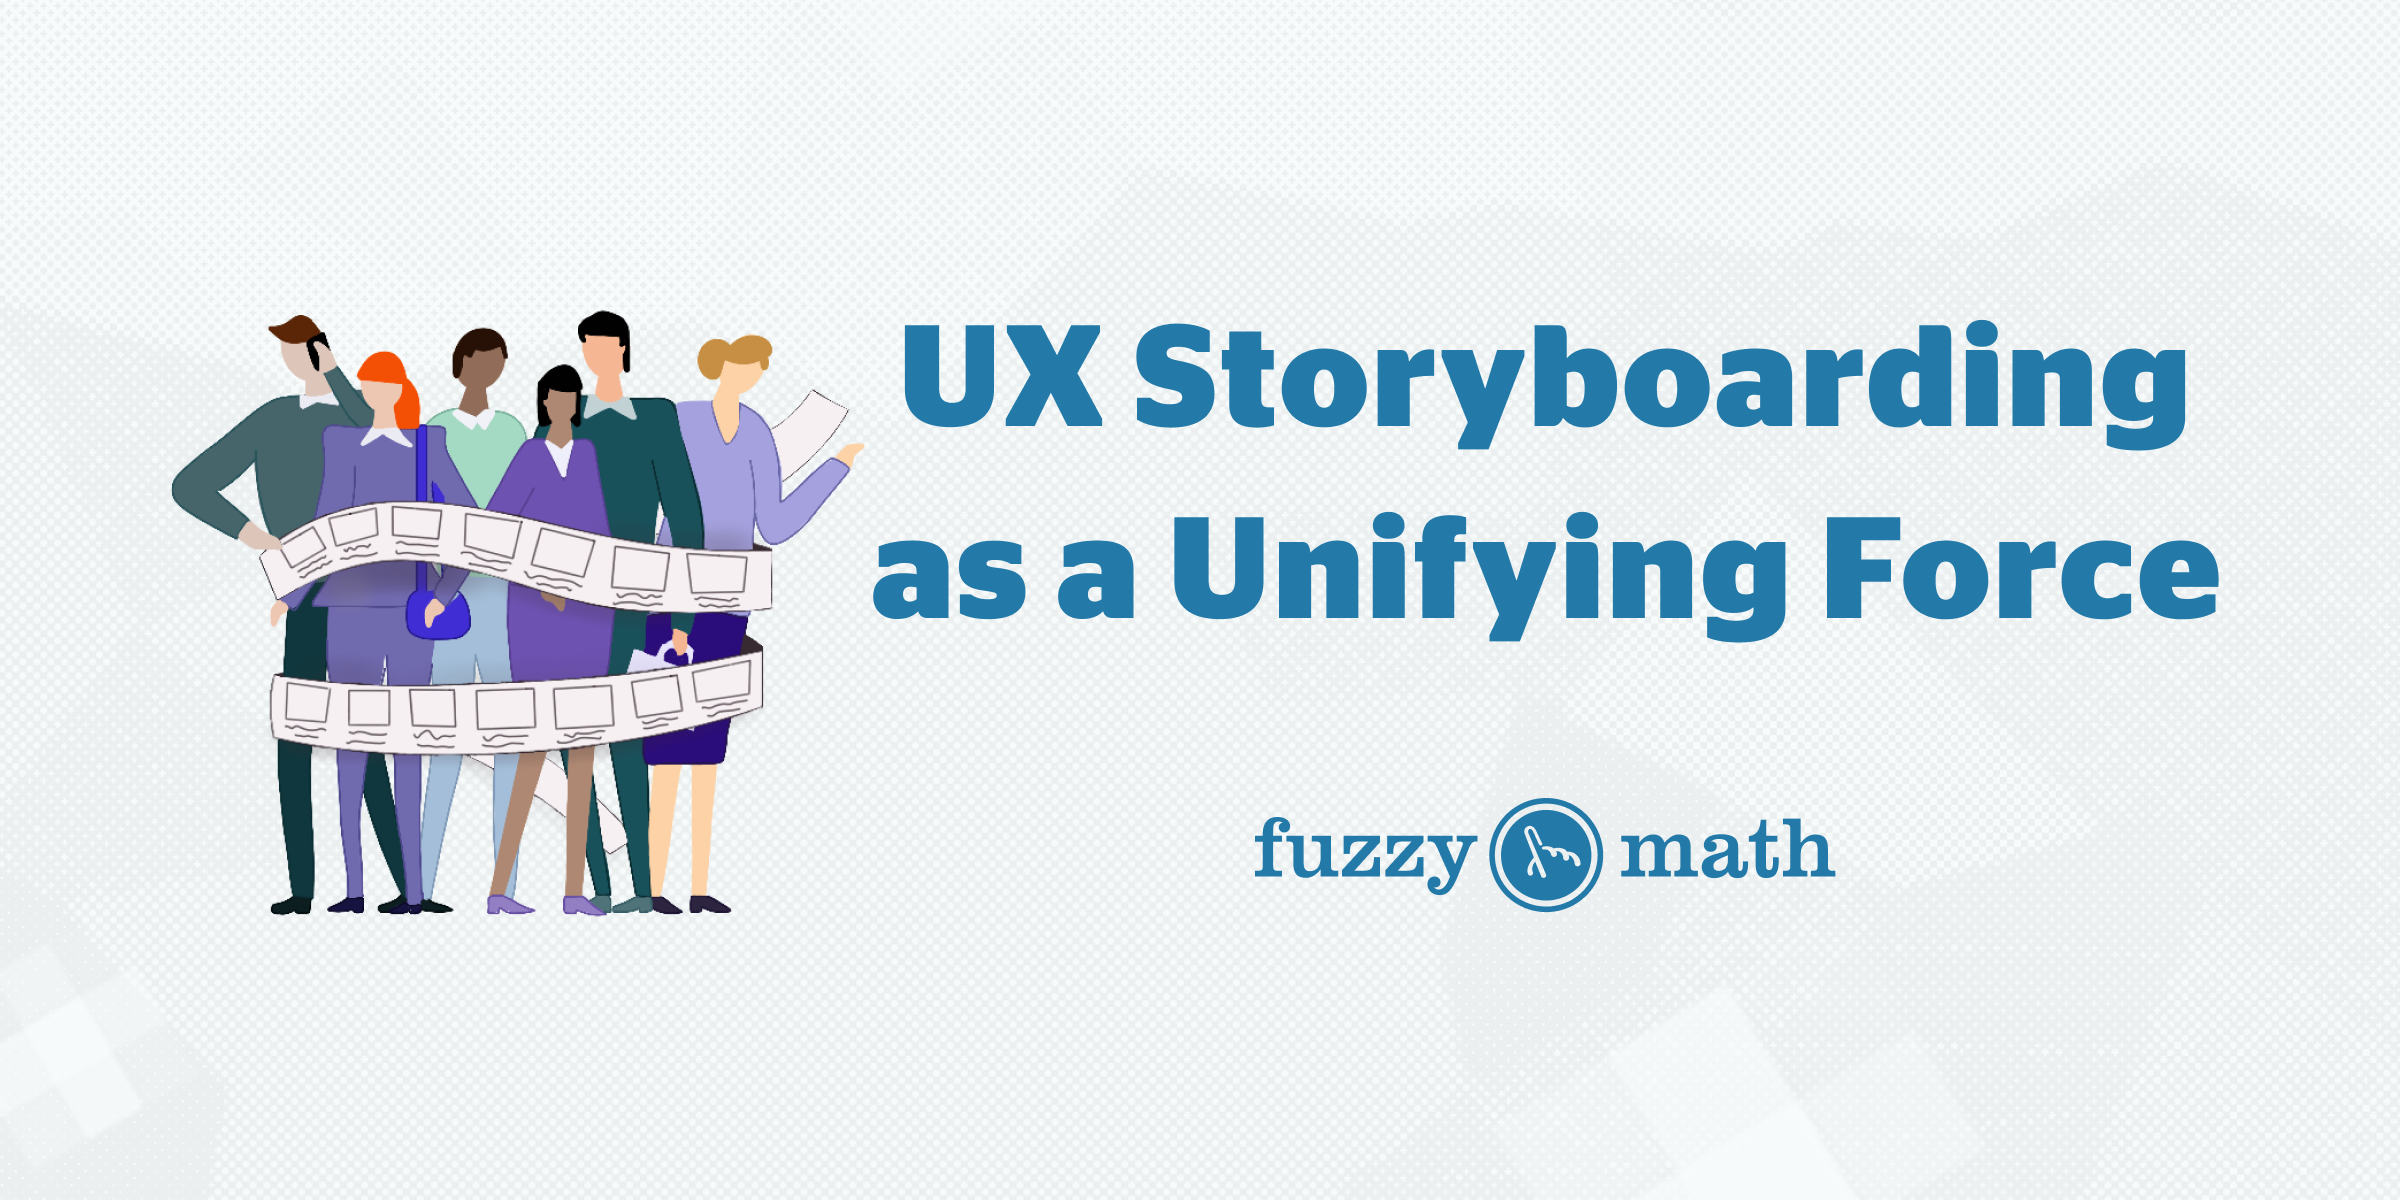 Thumbnail image of illustrated stakeholders wrapped in a storyboard and text of the blog post title: "UX Storyboarding as a Unifying Force"